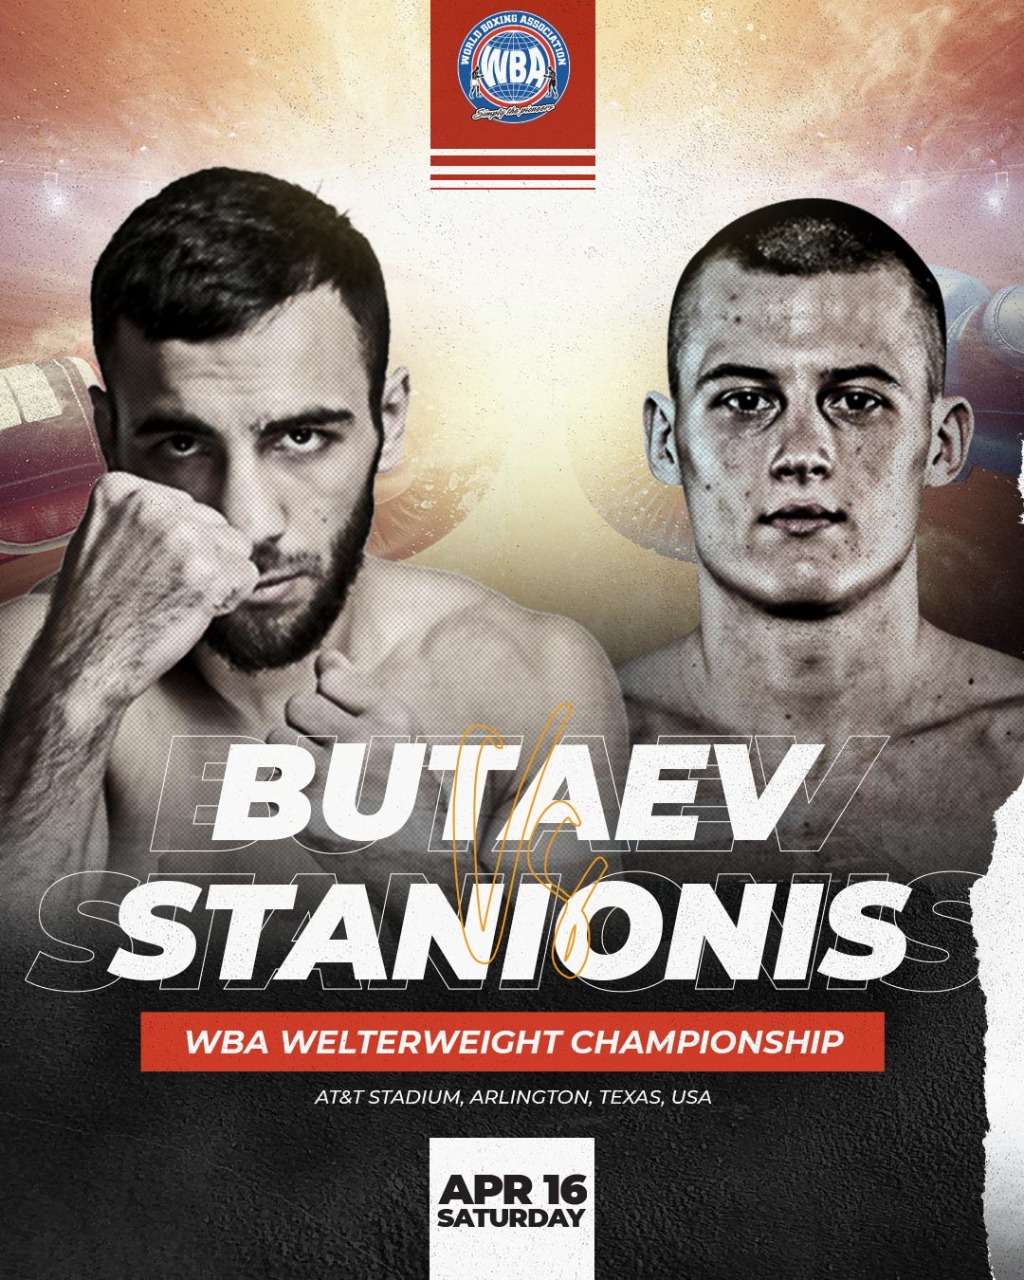 Butaev-Stanionis in a clash of talent 